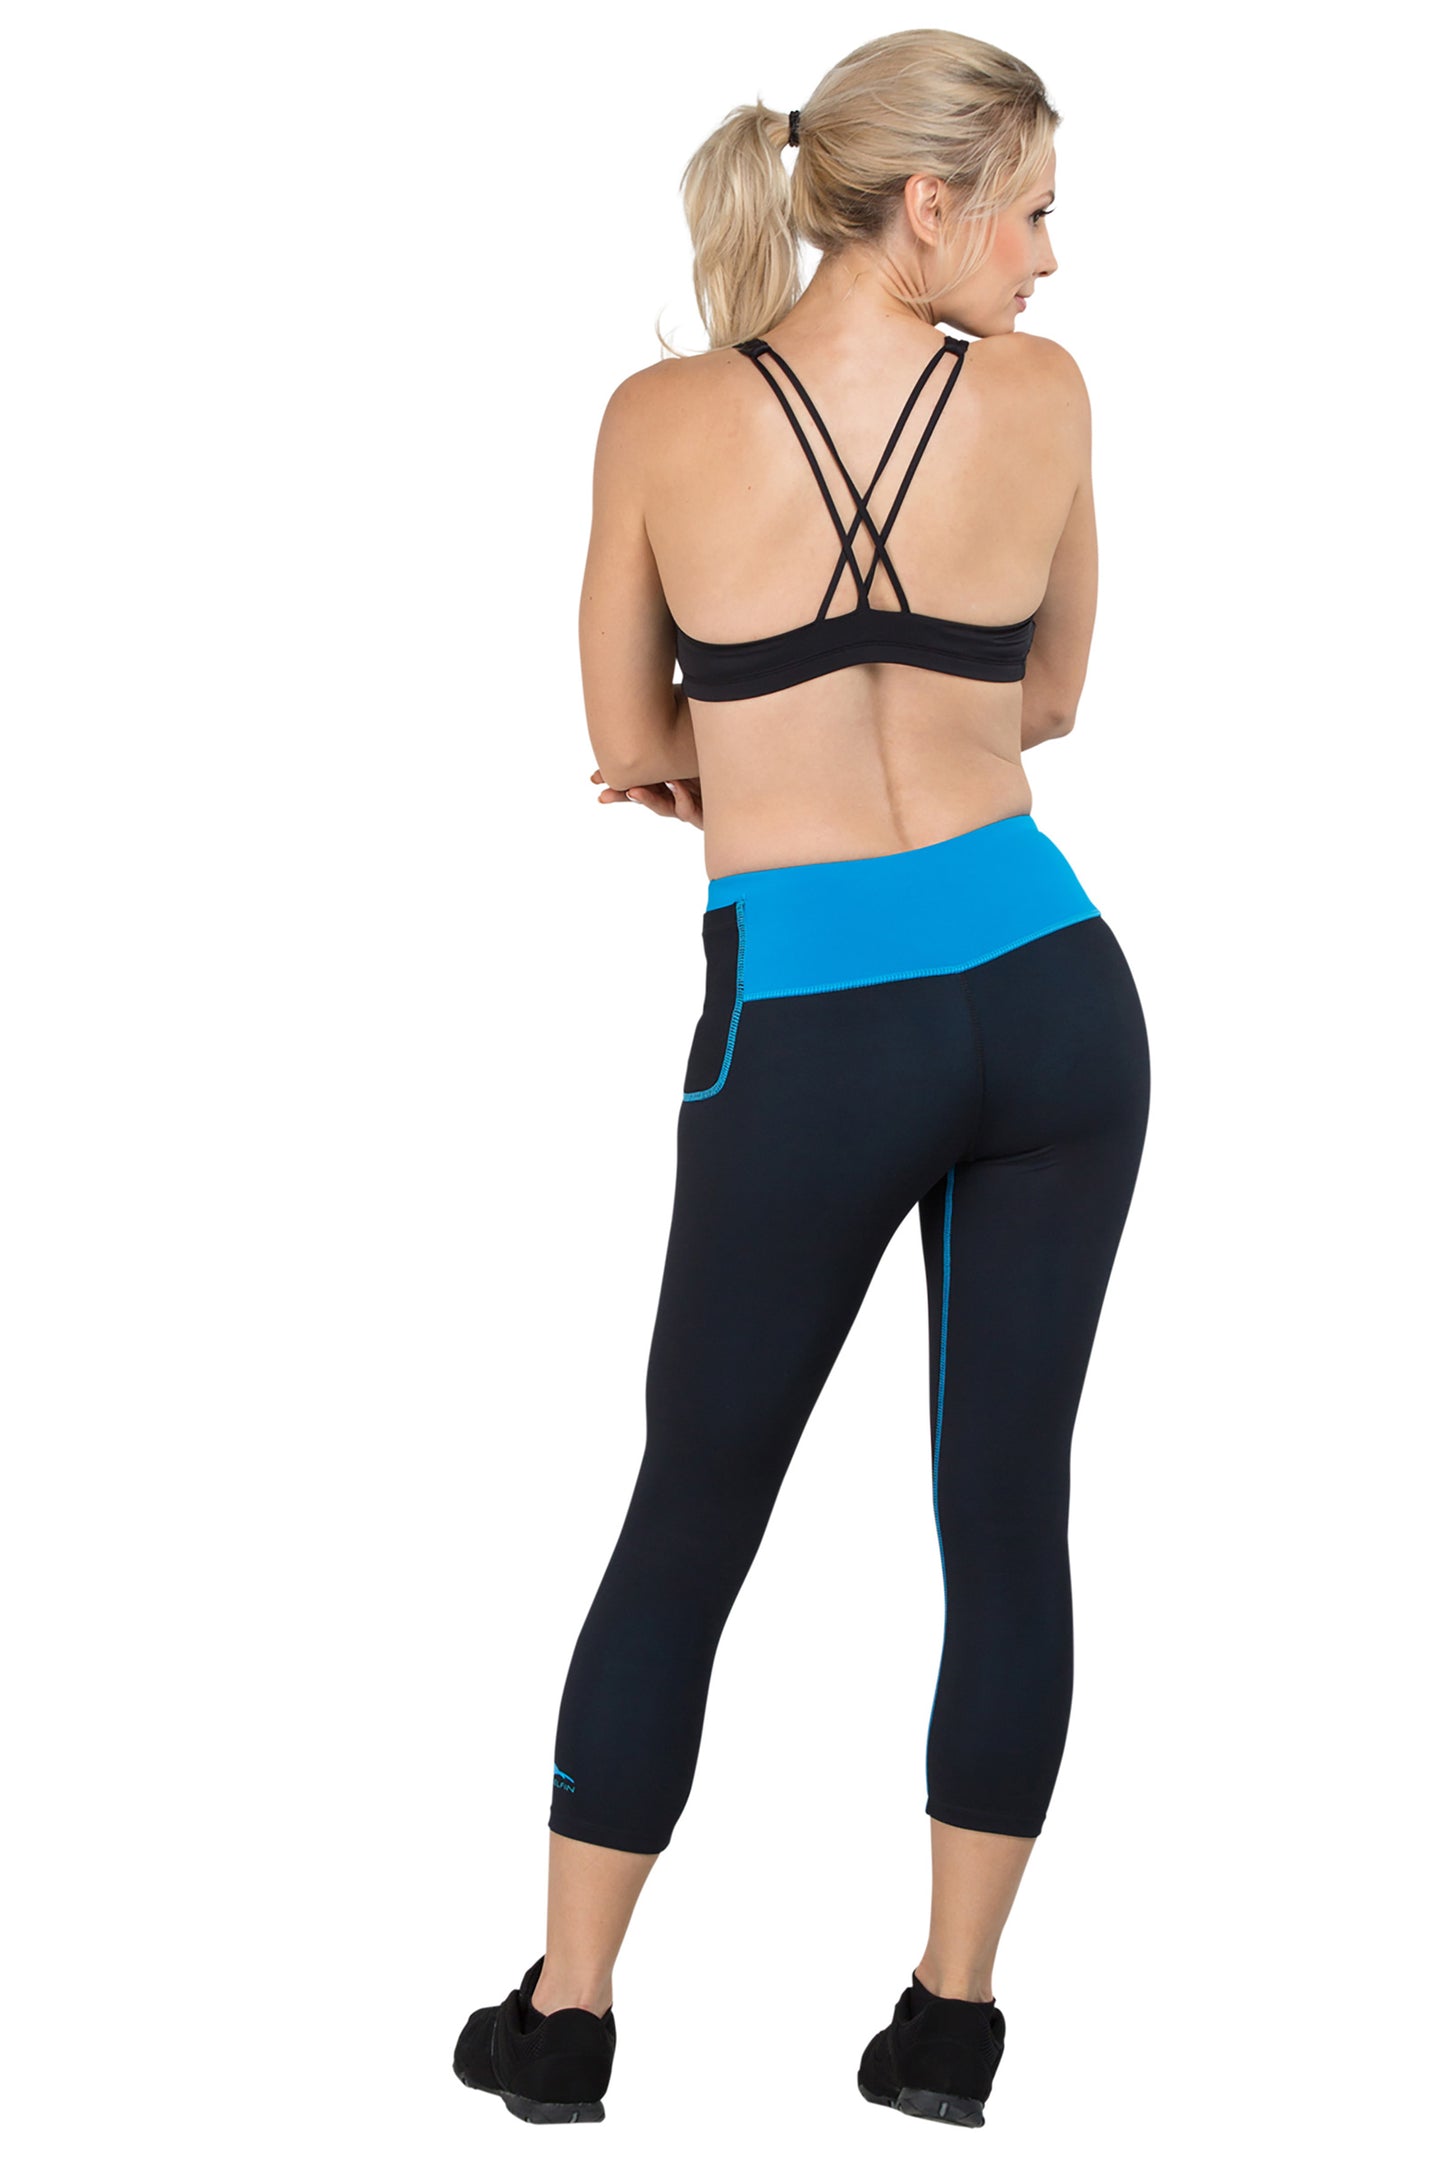 Mineral Infused Capris - Turquoise - Delfin Brands